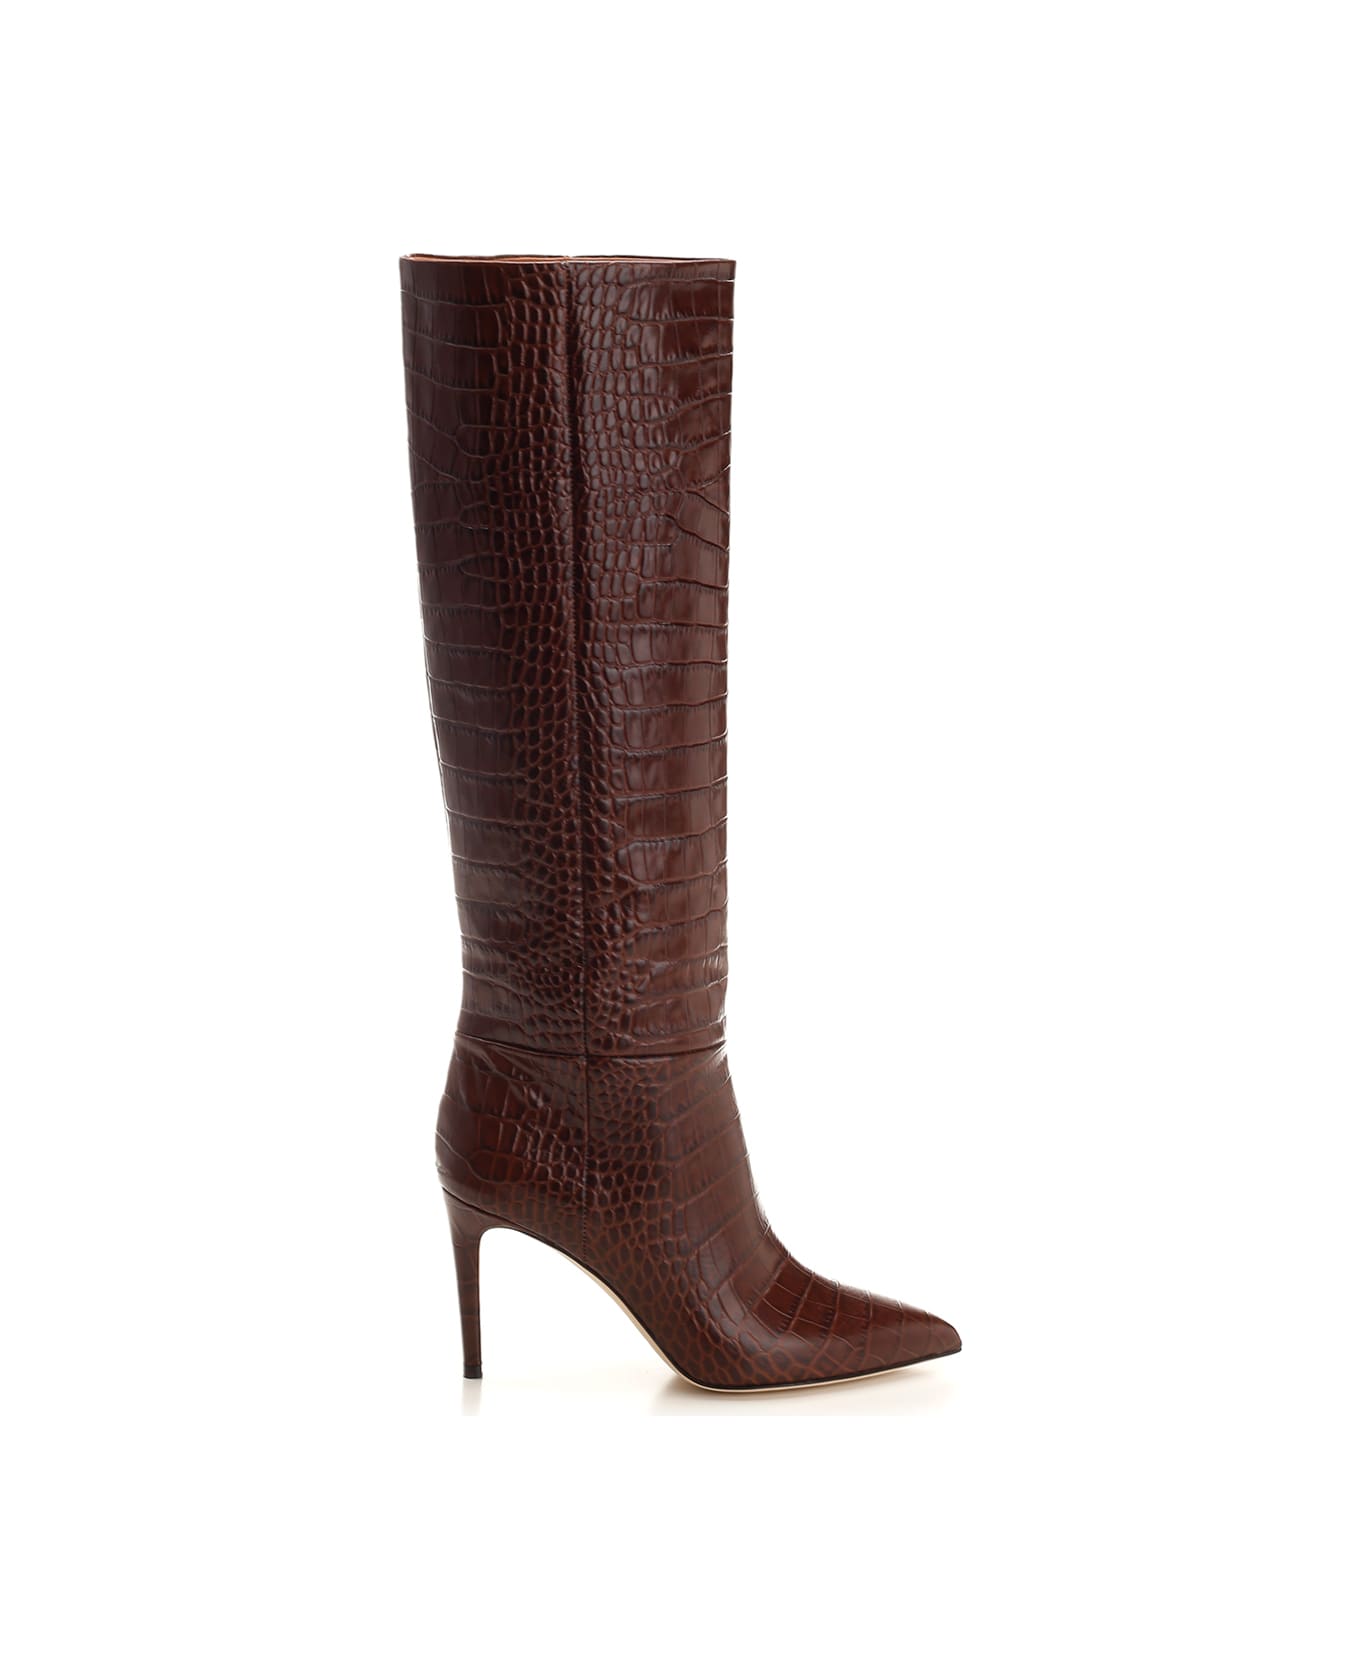 Paris Texas Embossed Leather Boots - Marrone